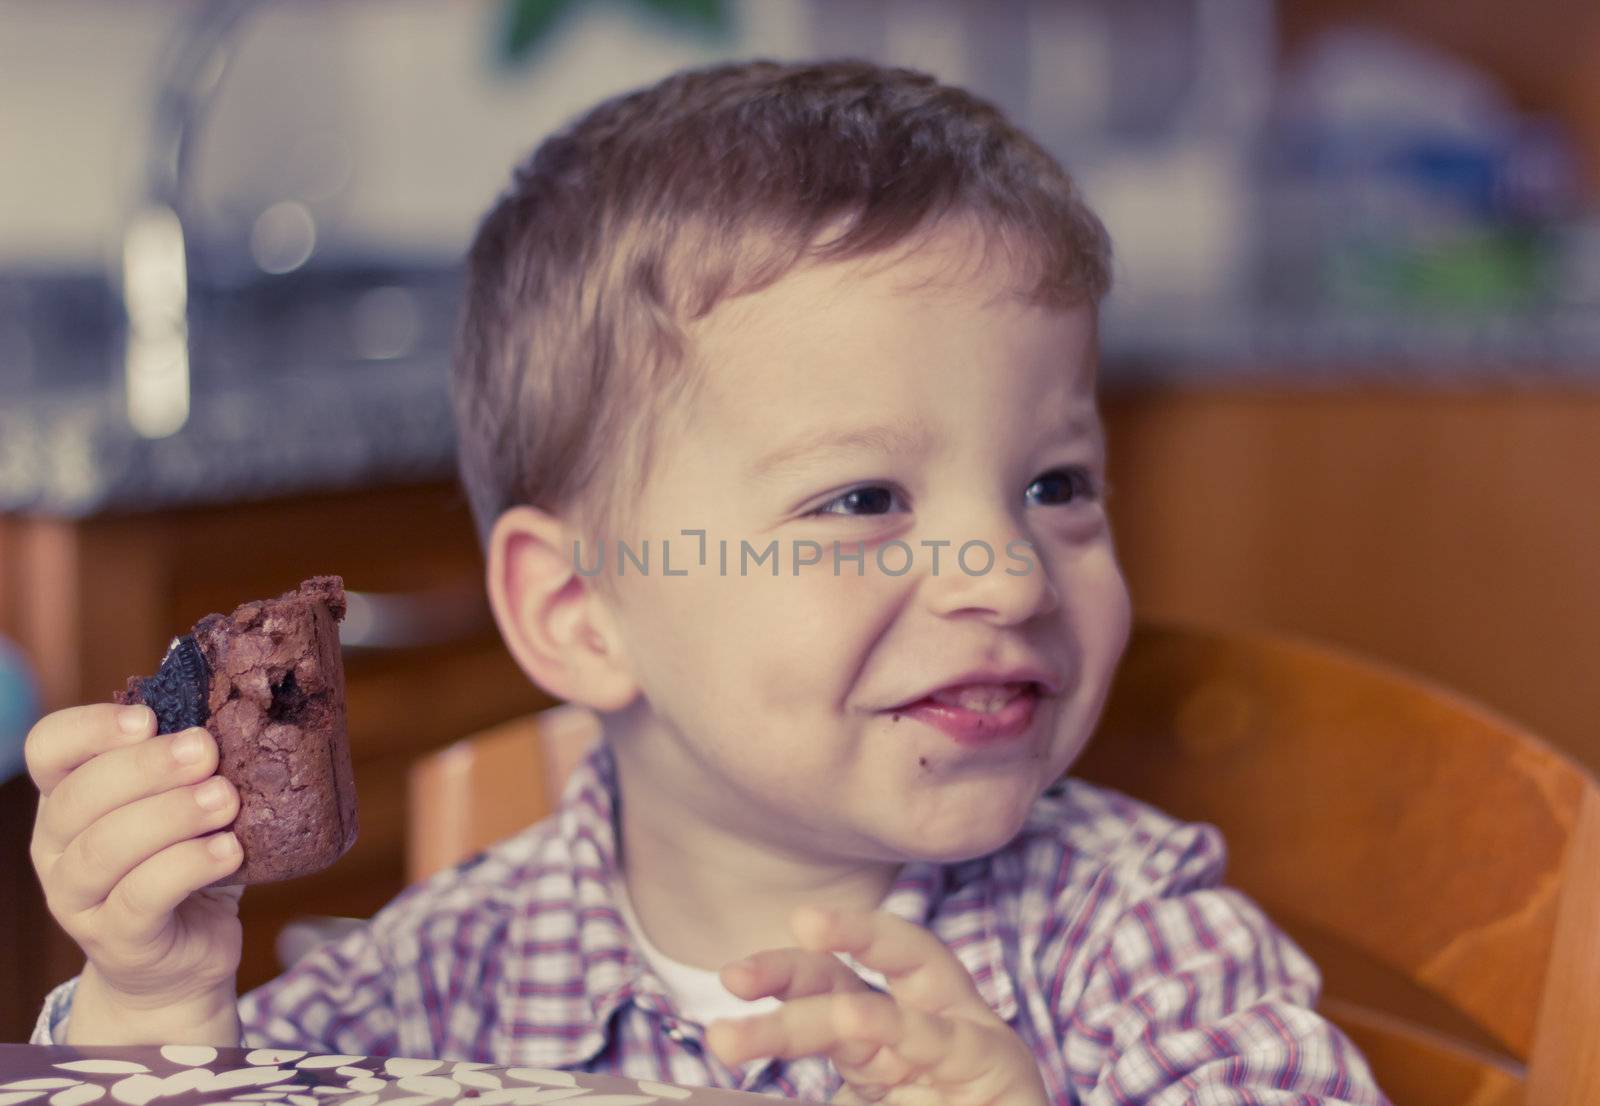 Child eating brownie by doble.d